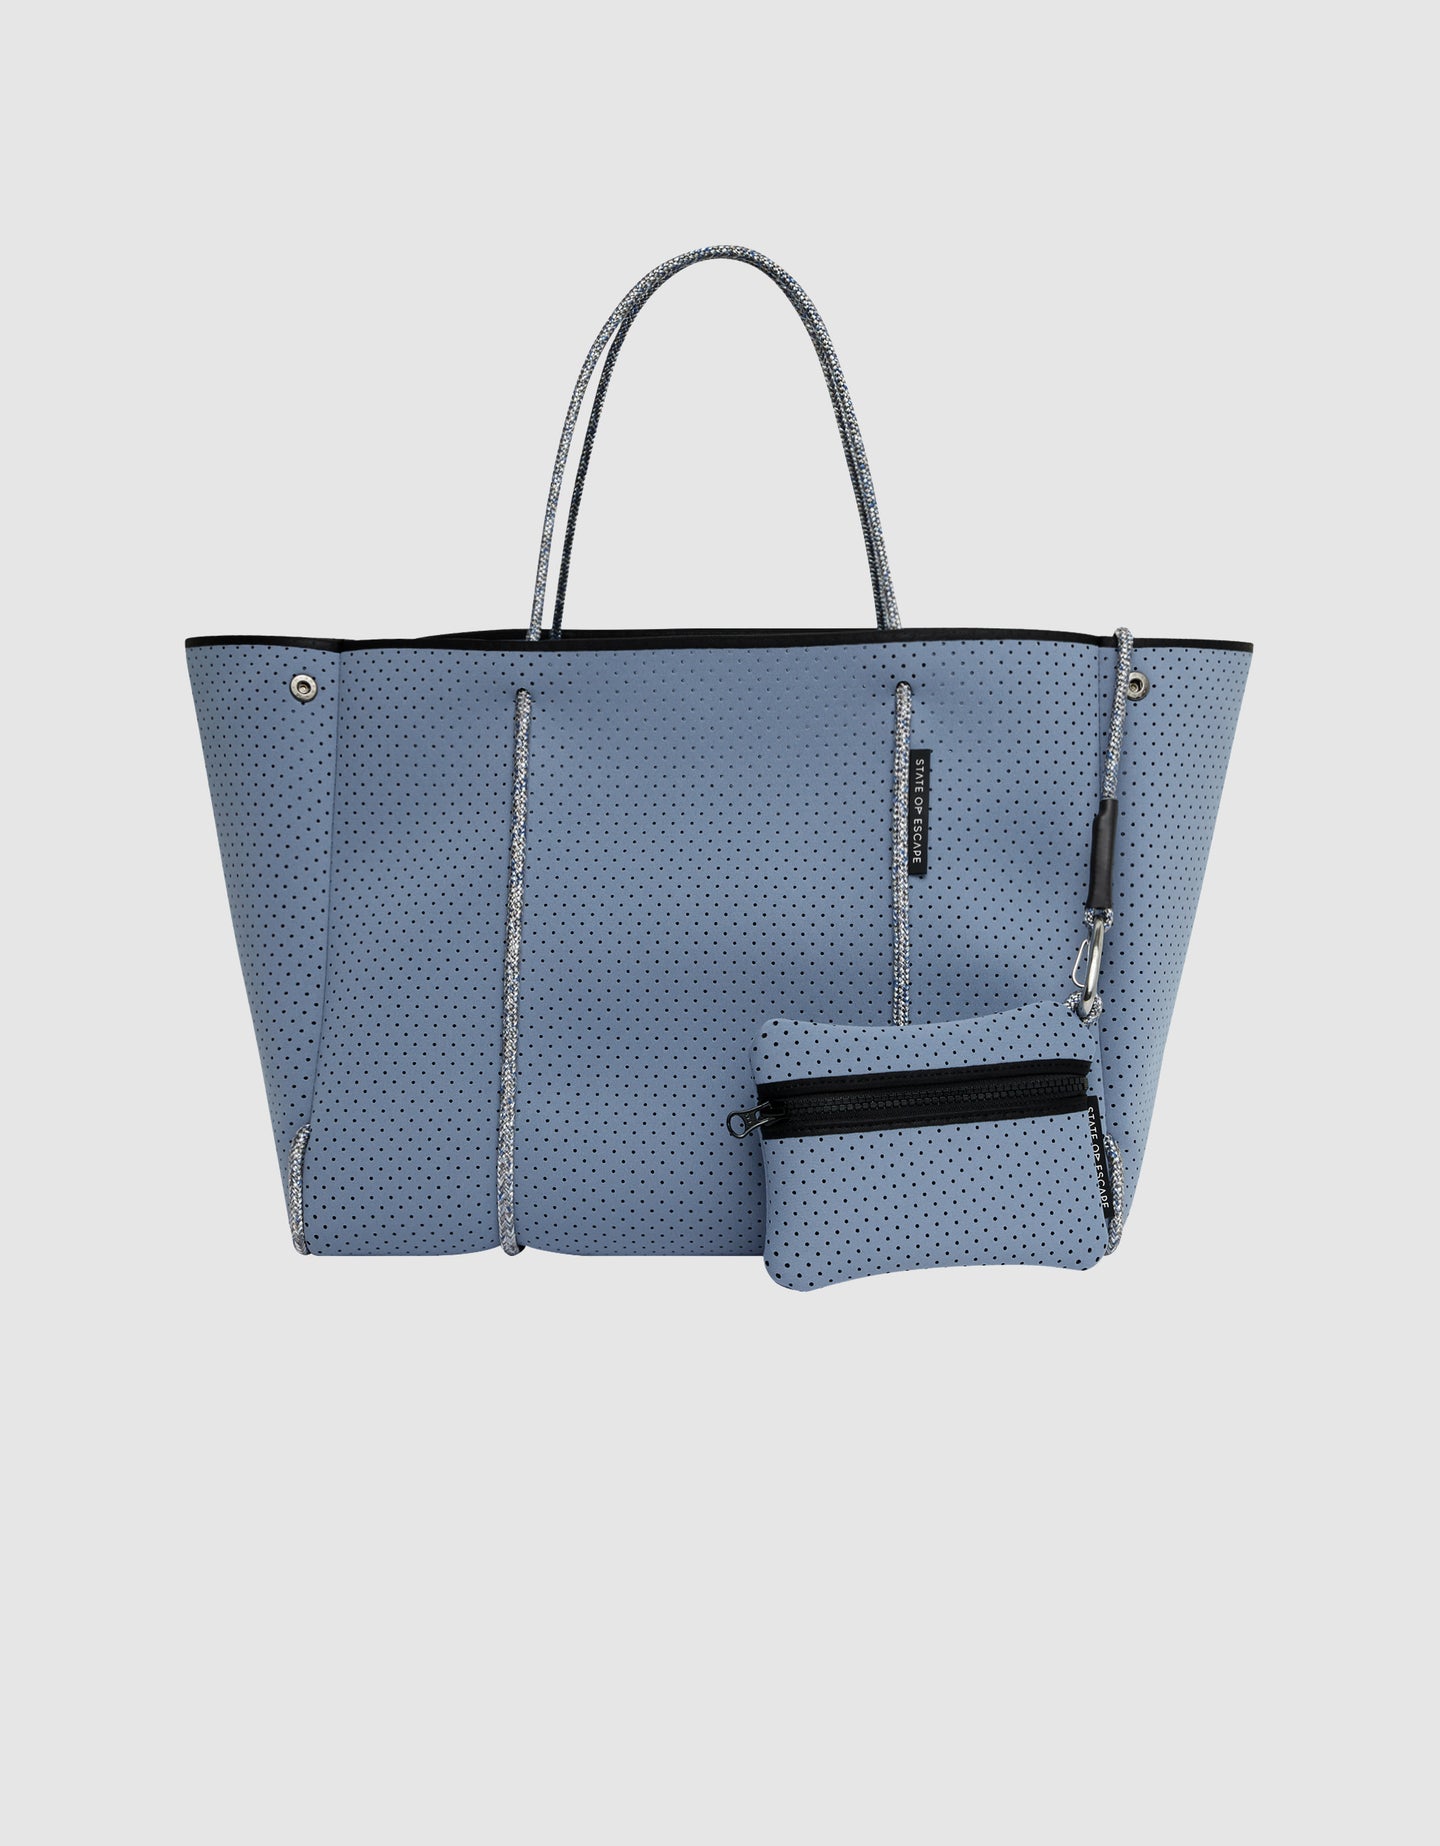 Escape™ tote in washed lapis – State of Escape